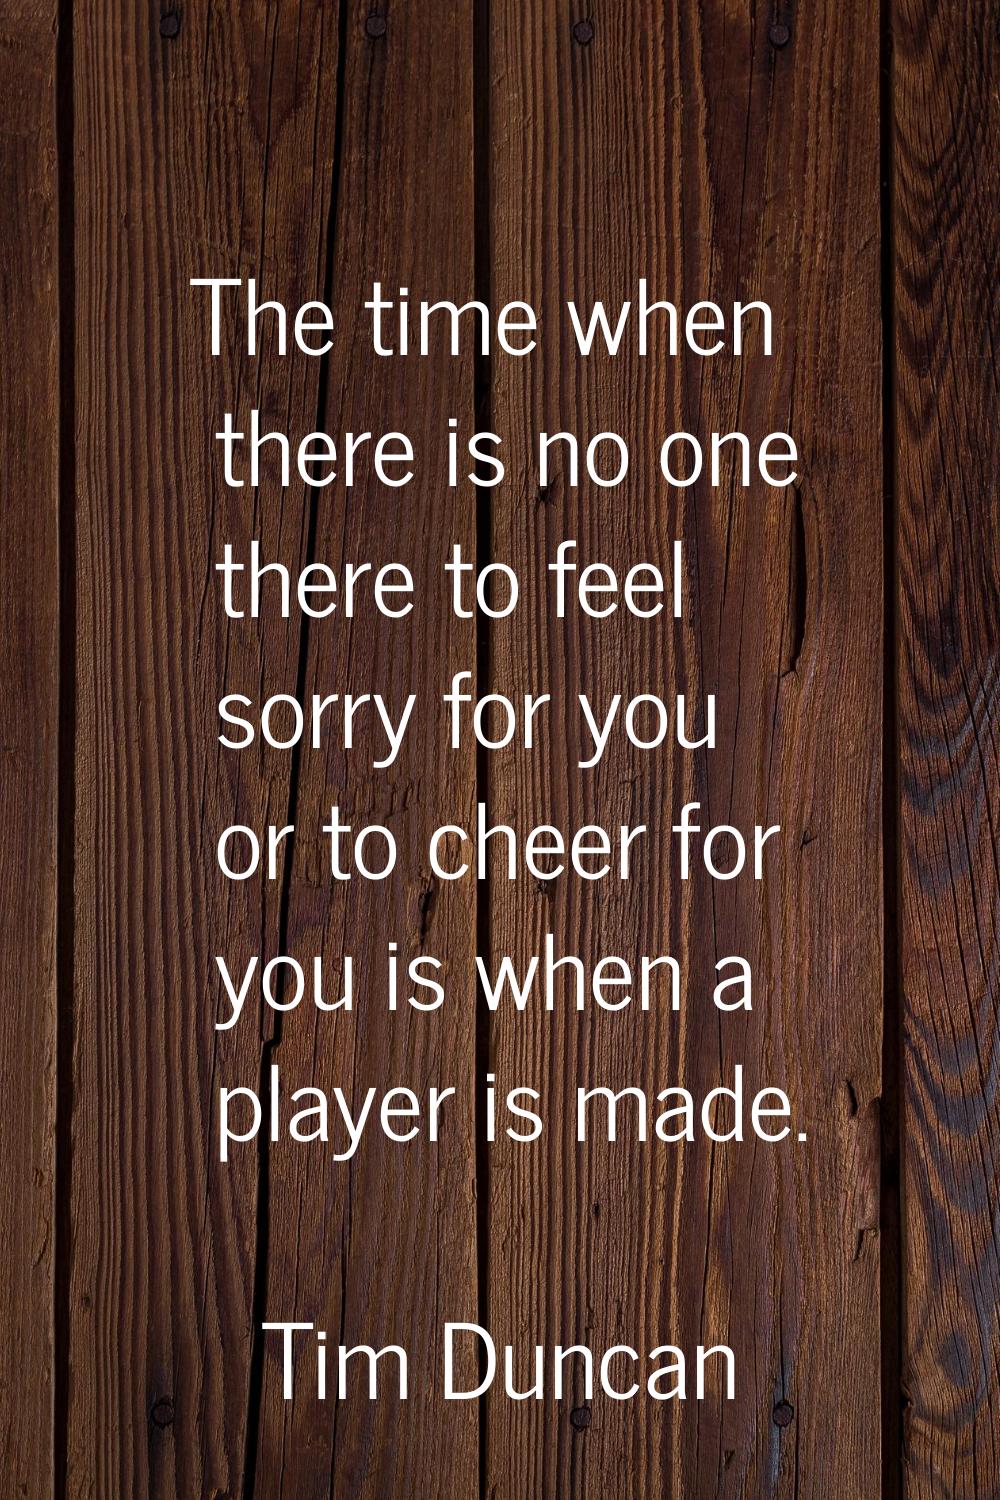 The time when there is no one there to feel sorry for you or to cheer for you is when a player is m